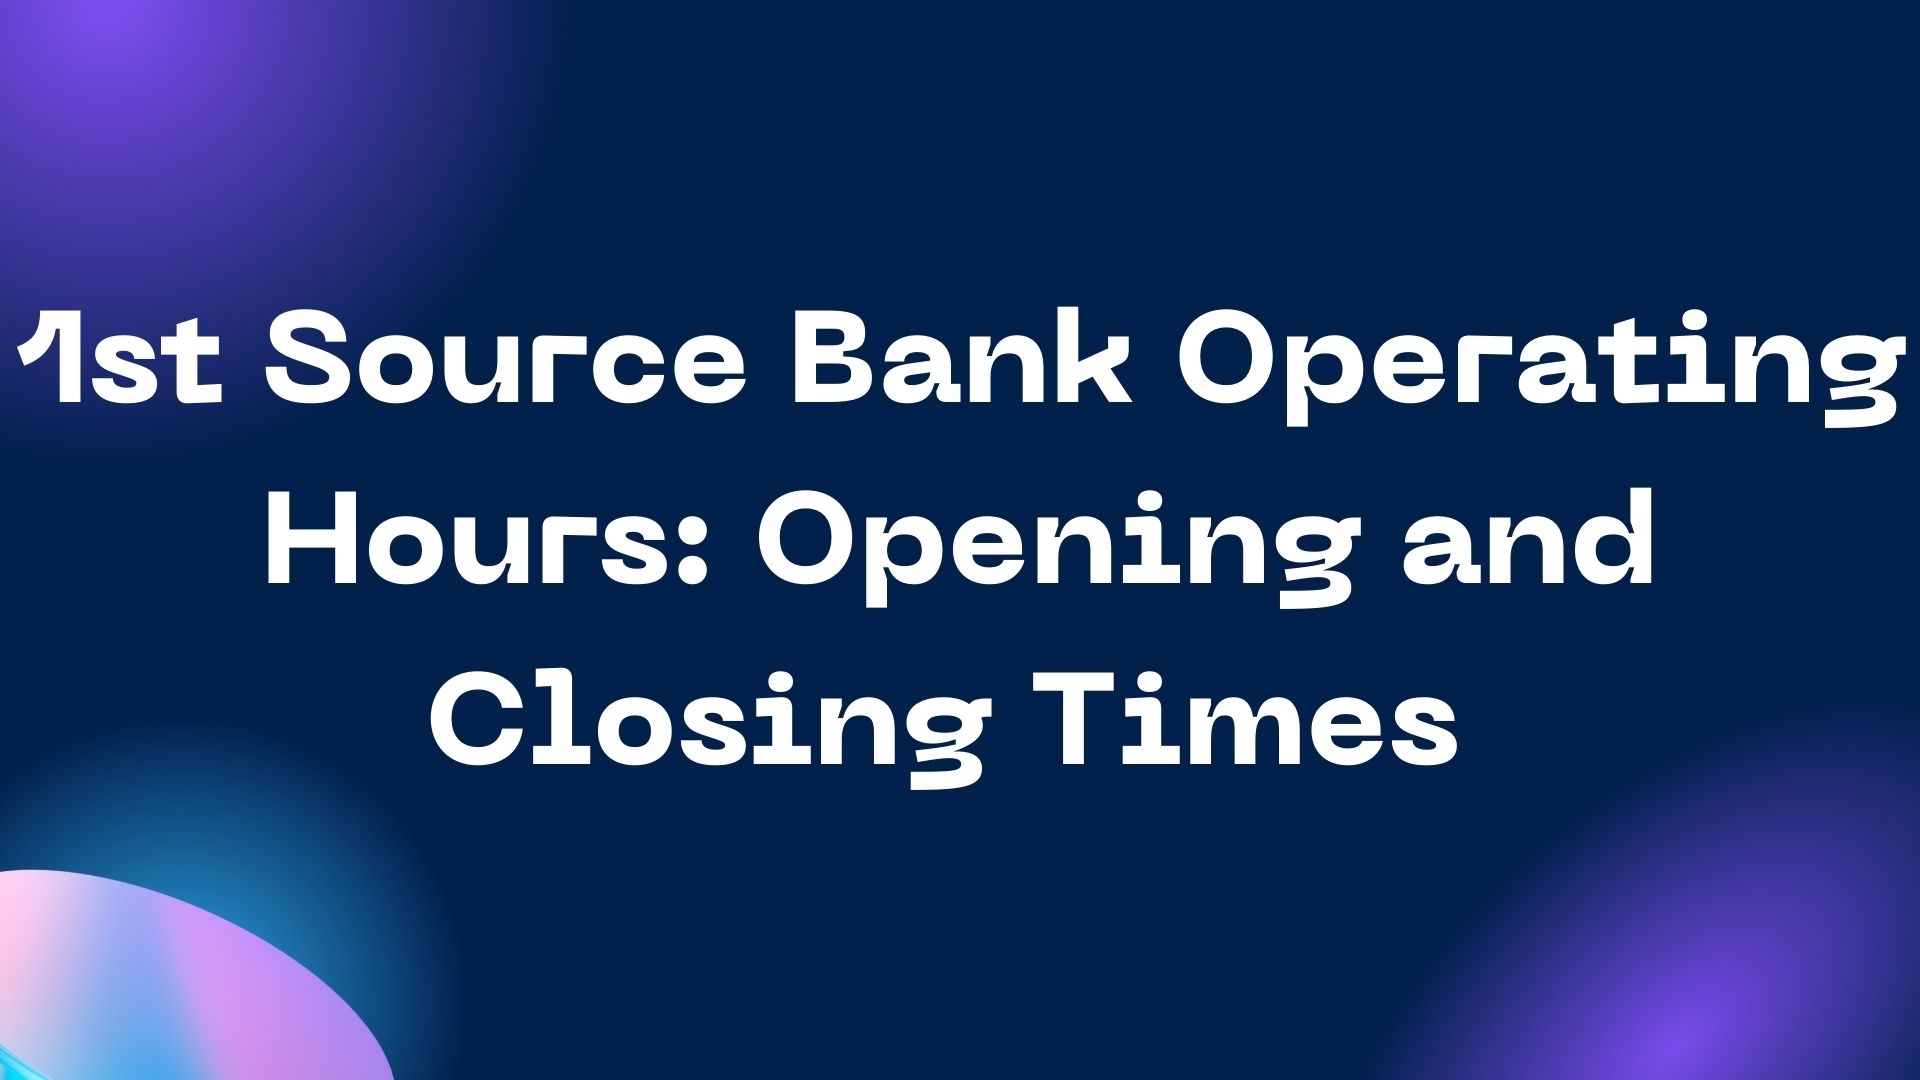 1st Source Bank Operating Hours: Opening and Closing Times